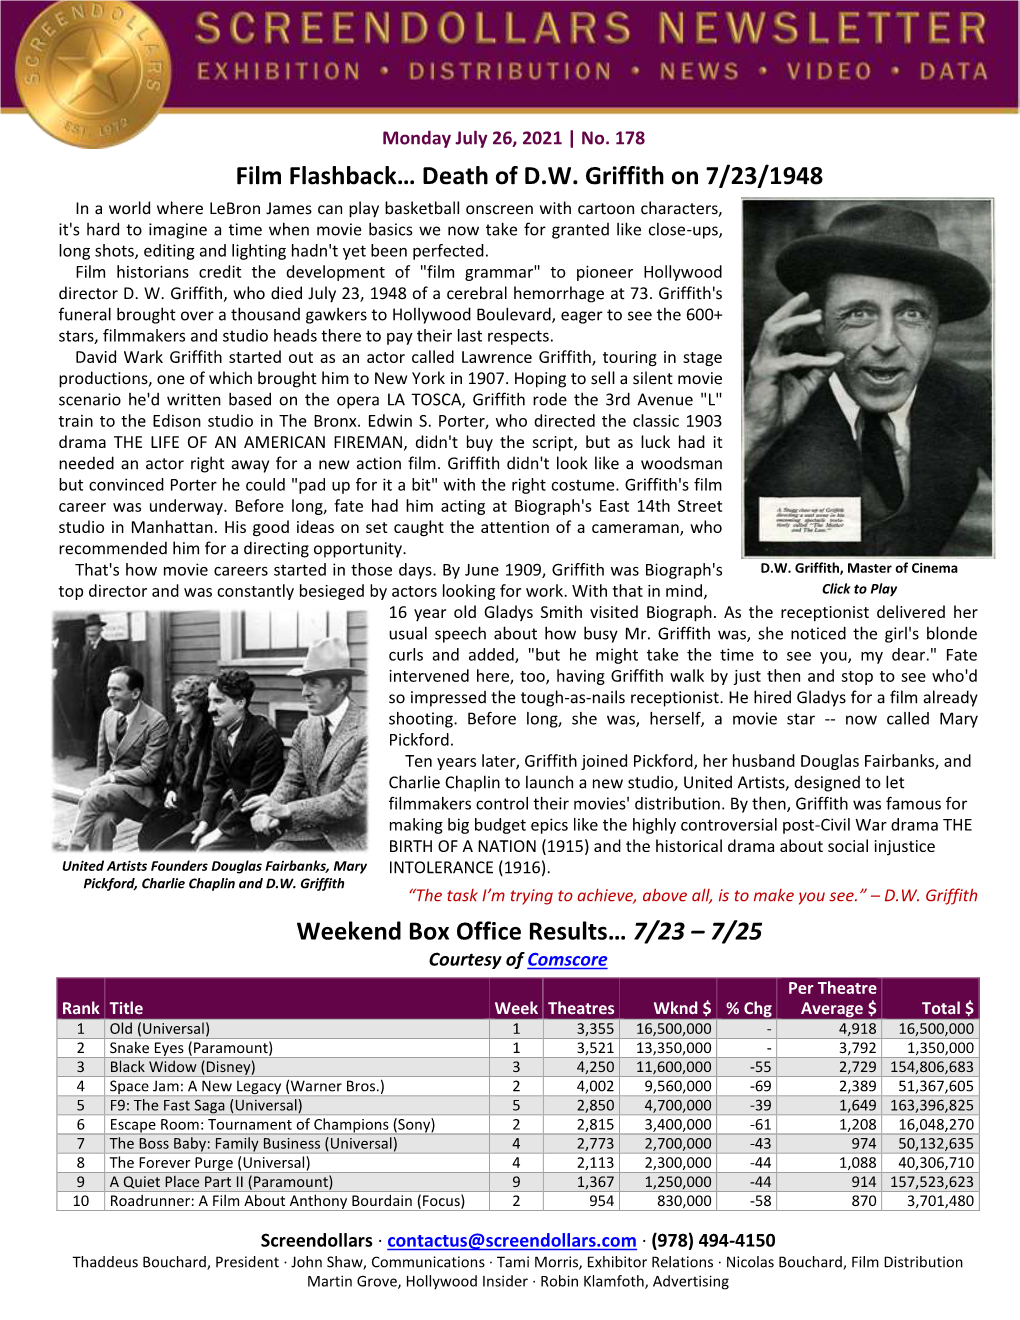 Film Flashback… Death of DW Griffith on 7/23/1948 Weekend Box Office